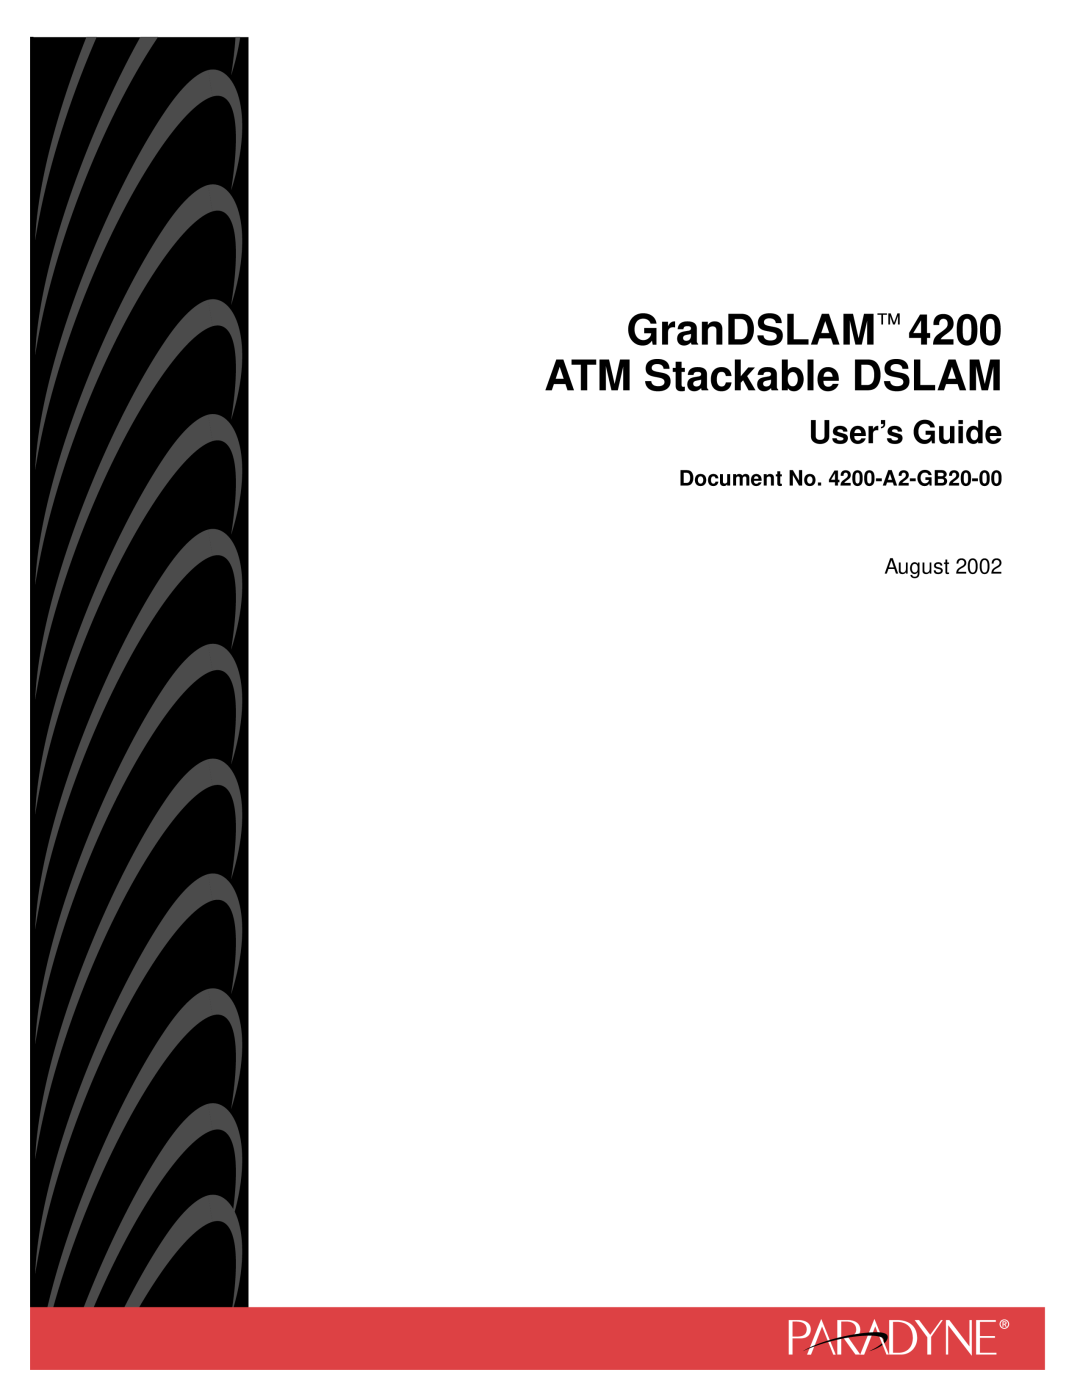 Paradyne manual GranDSLAM ATM Stackable DSLAM, User’s Guide, Document No. 4200-A2-GB20-00, August 